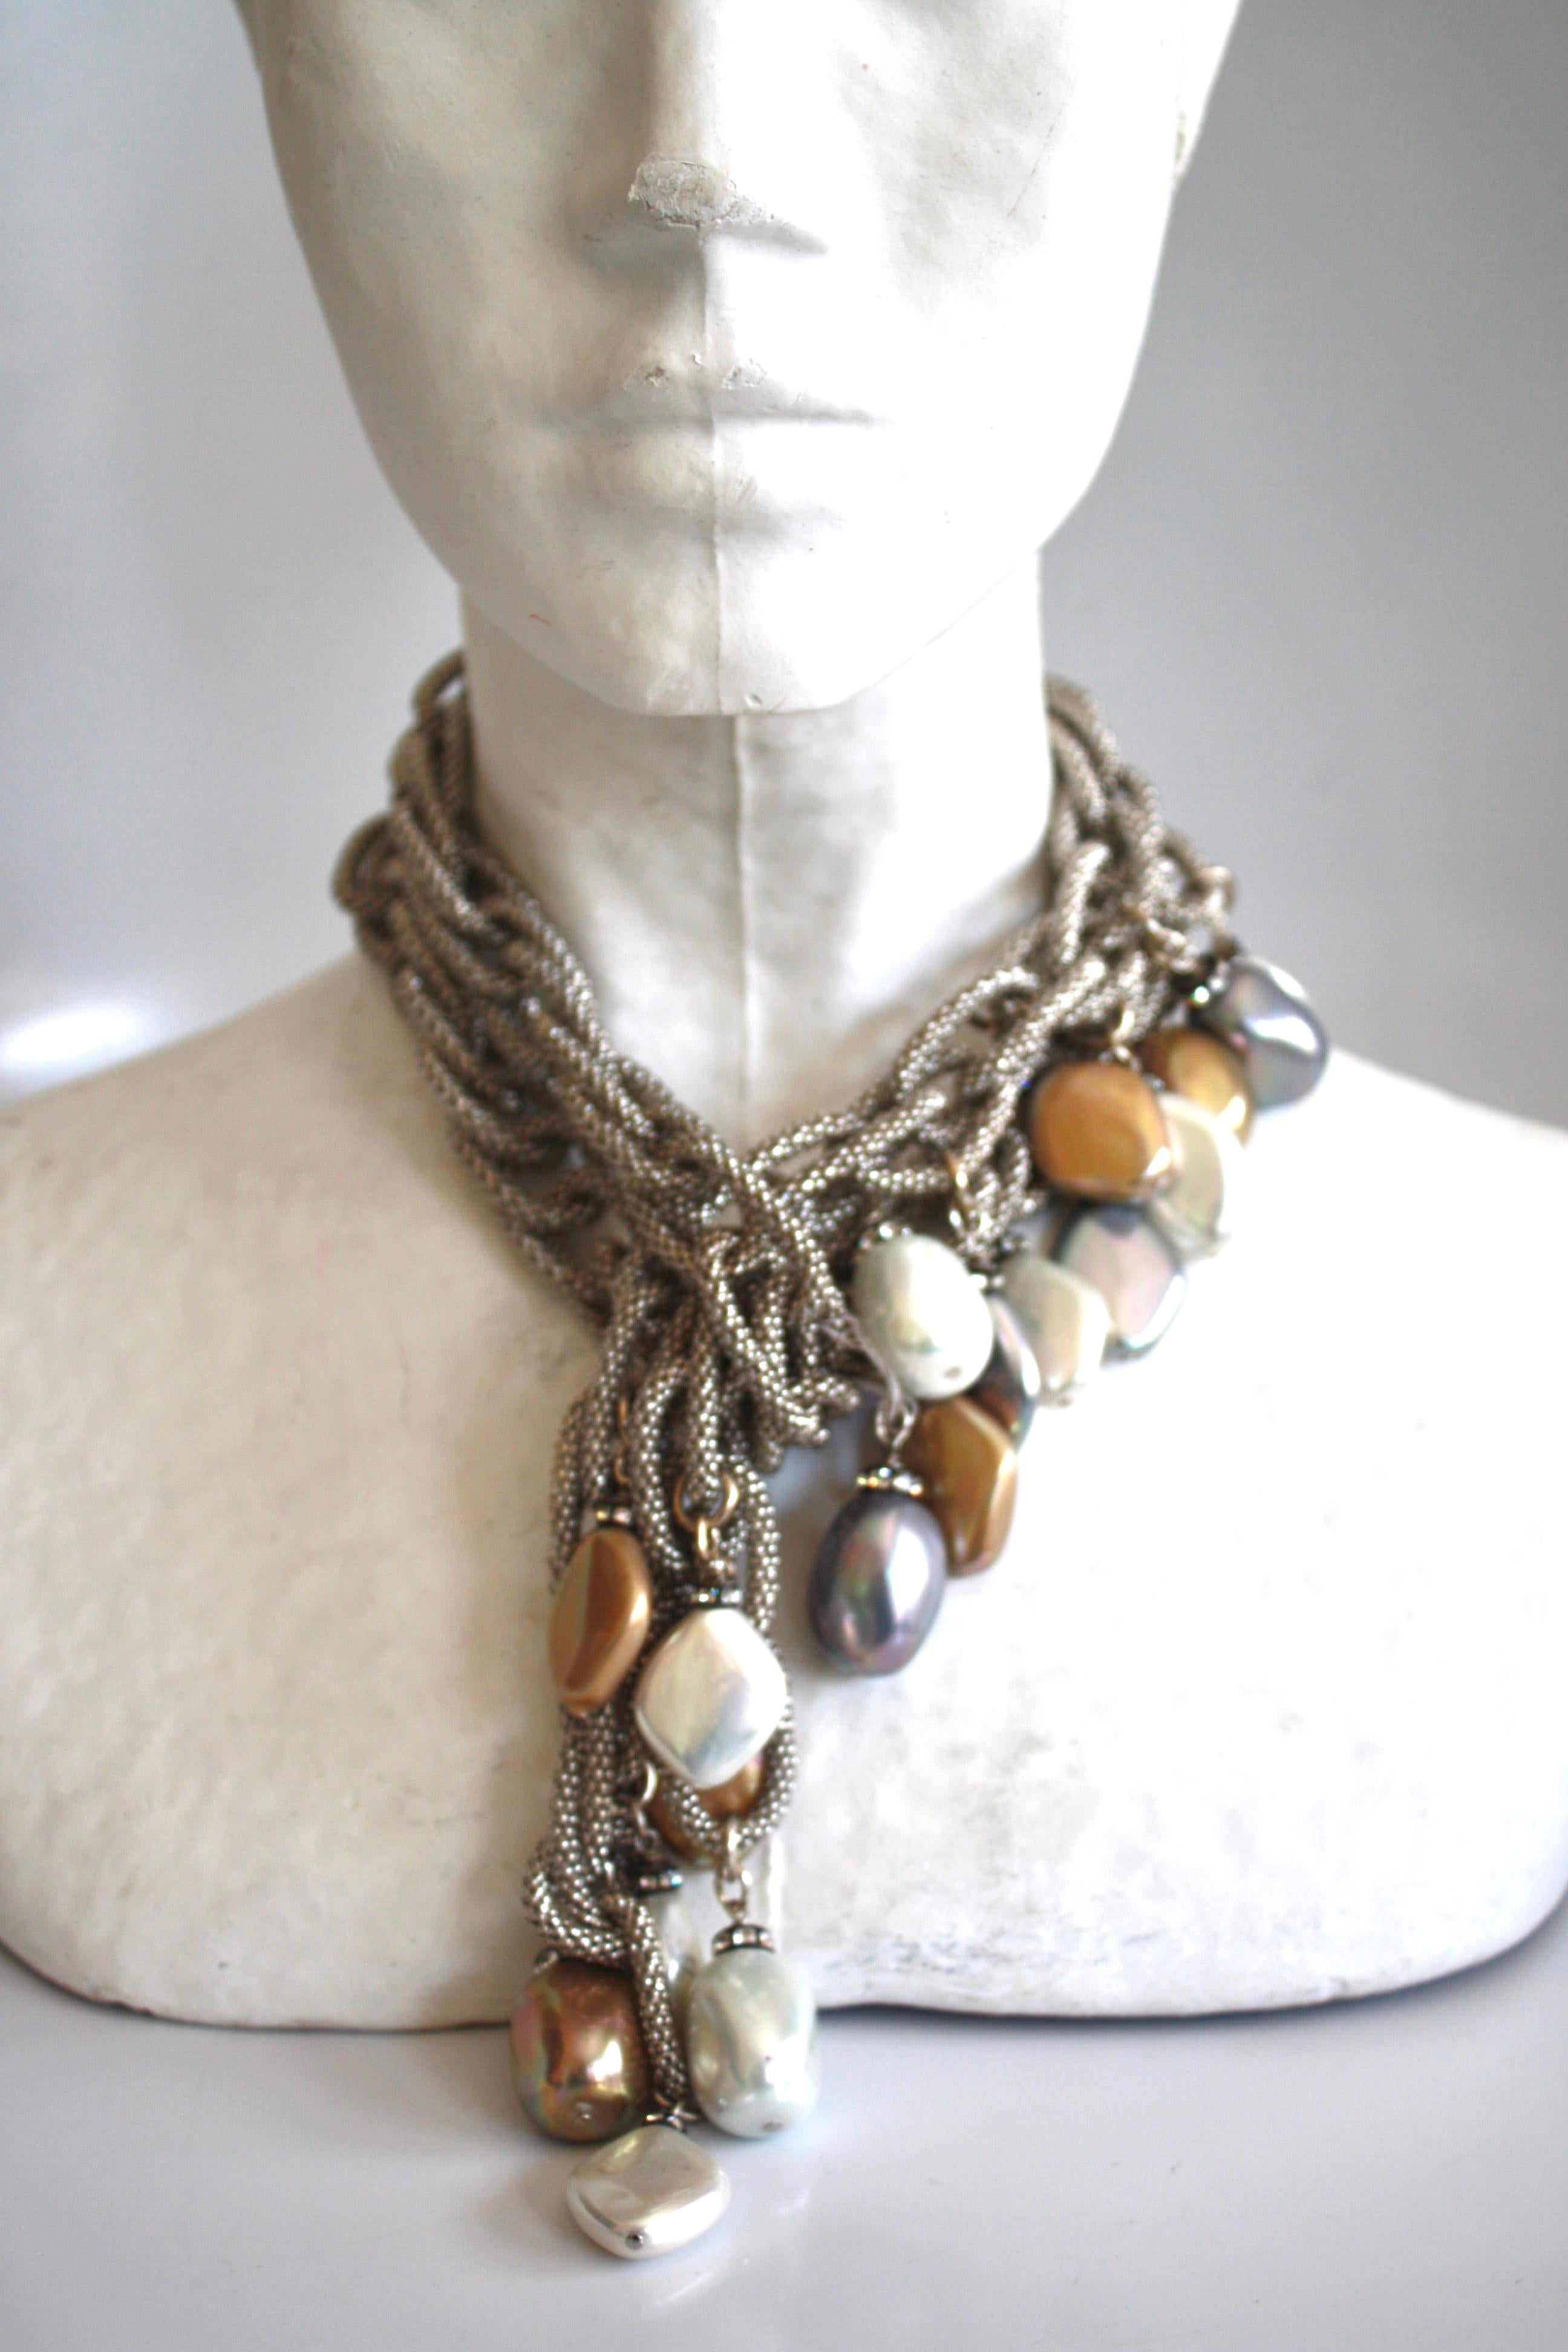 Gorgeous chain necklace with glass pearls and Venetian glass beads from Francoise Montague. 